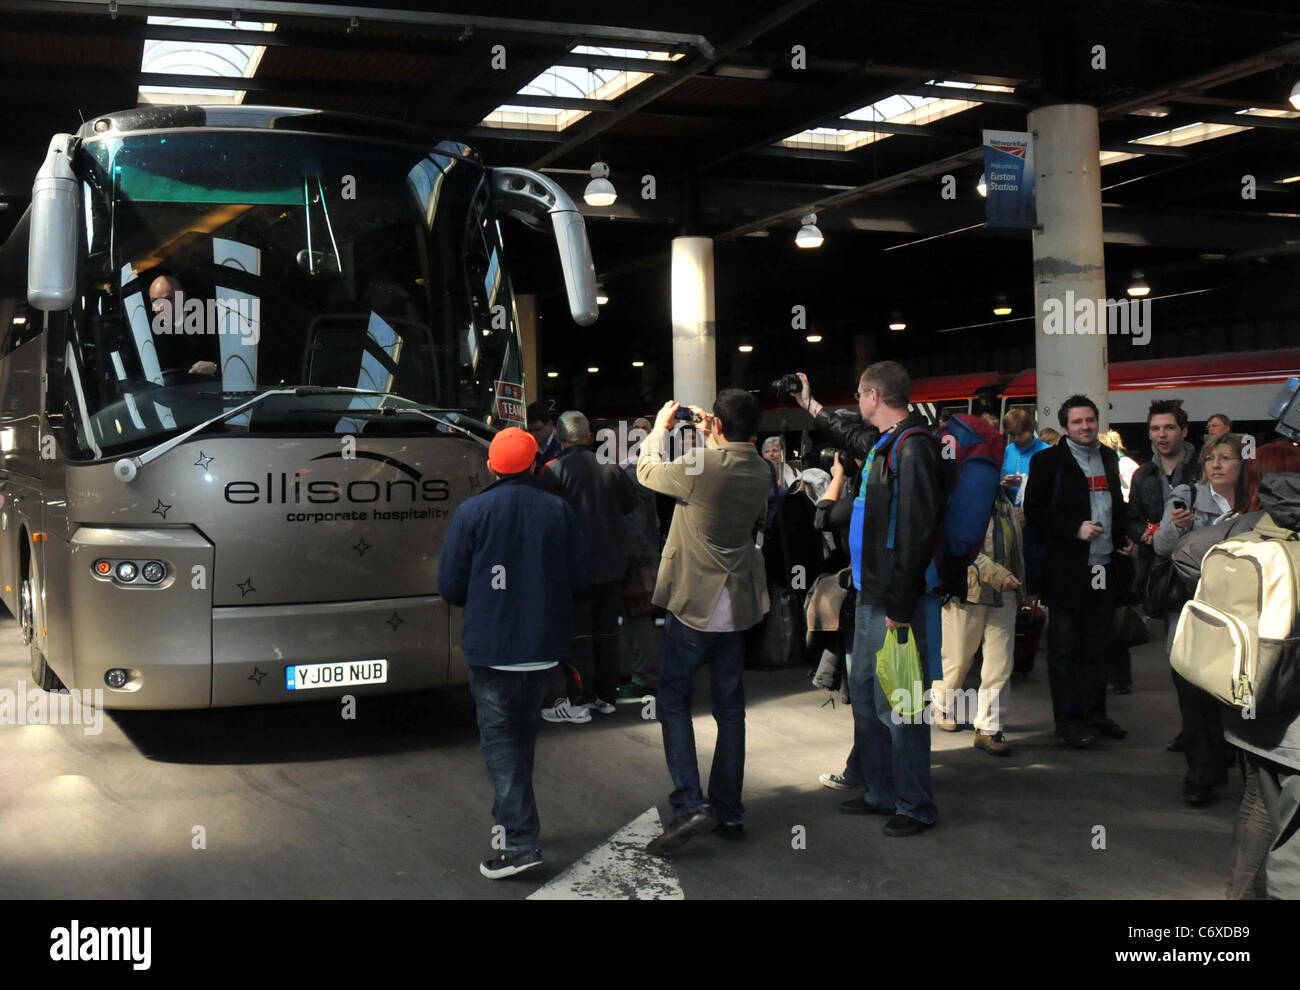 The Liverpool Football Team arrive at London Euston station from Runcorn  station board a coach waiting for them on the platform Stock Photo - Alamy